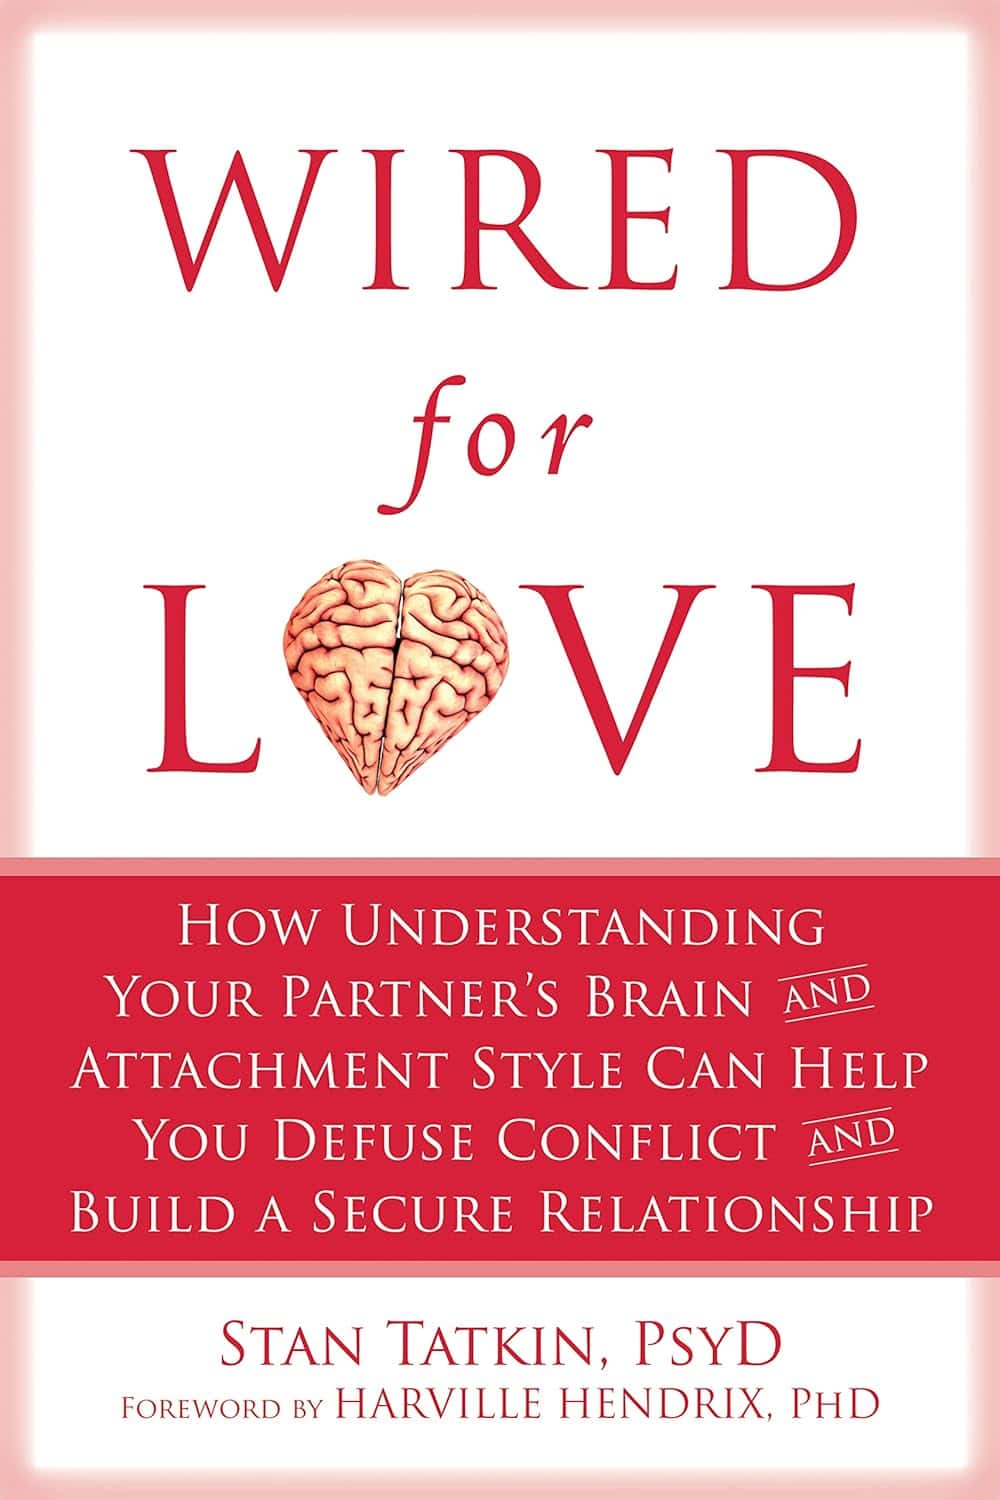 Wired for Love by Stan Tatkin